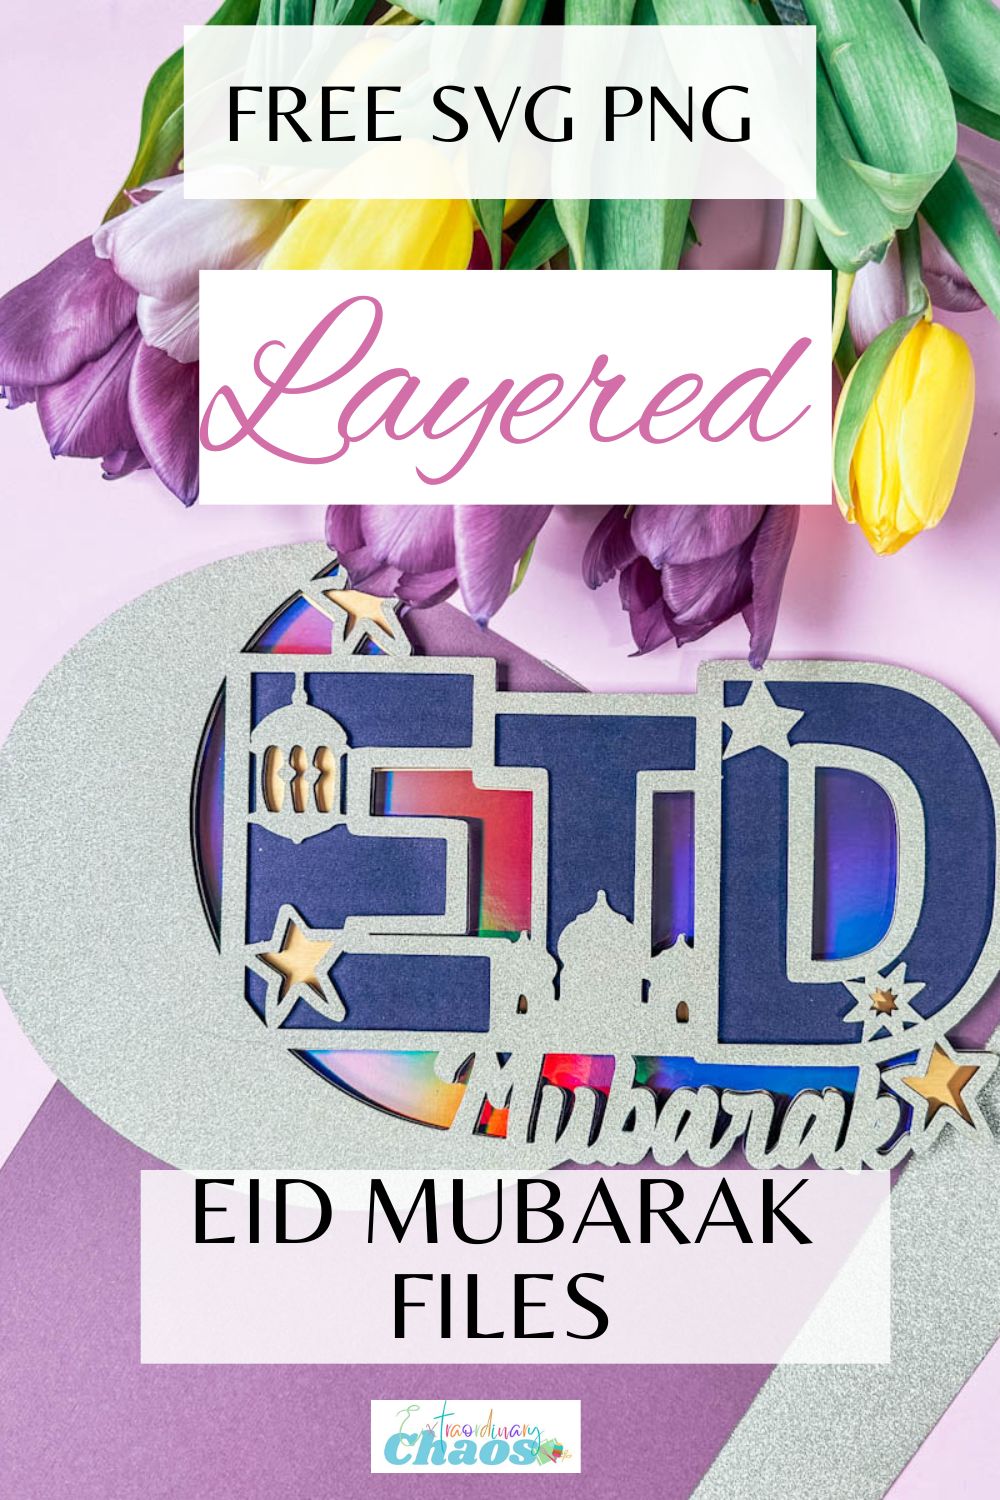 Free SVG PNG layered Eid Mubarak files for crafts with Cricut, Silhouette, xTool Glowforge